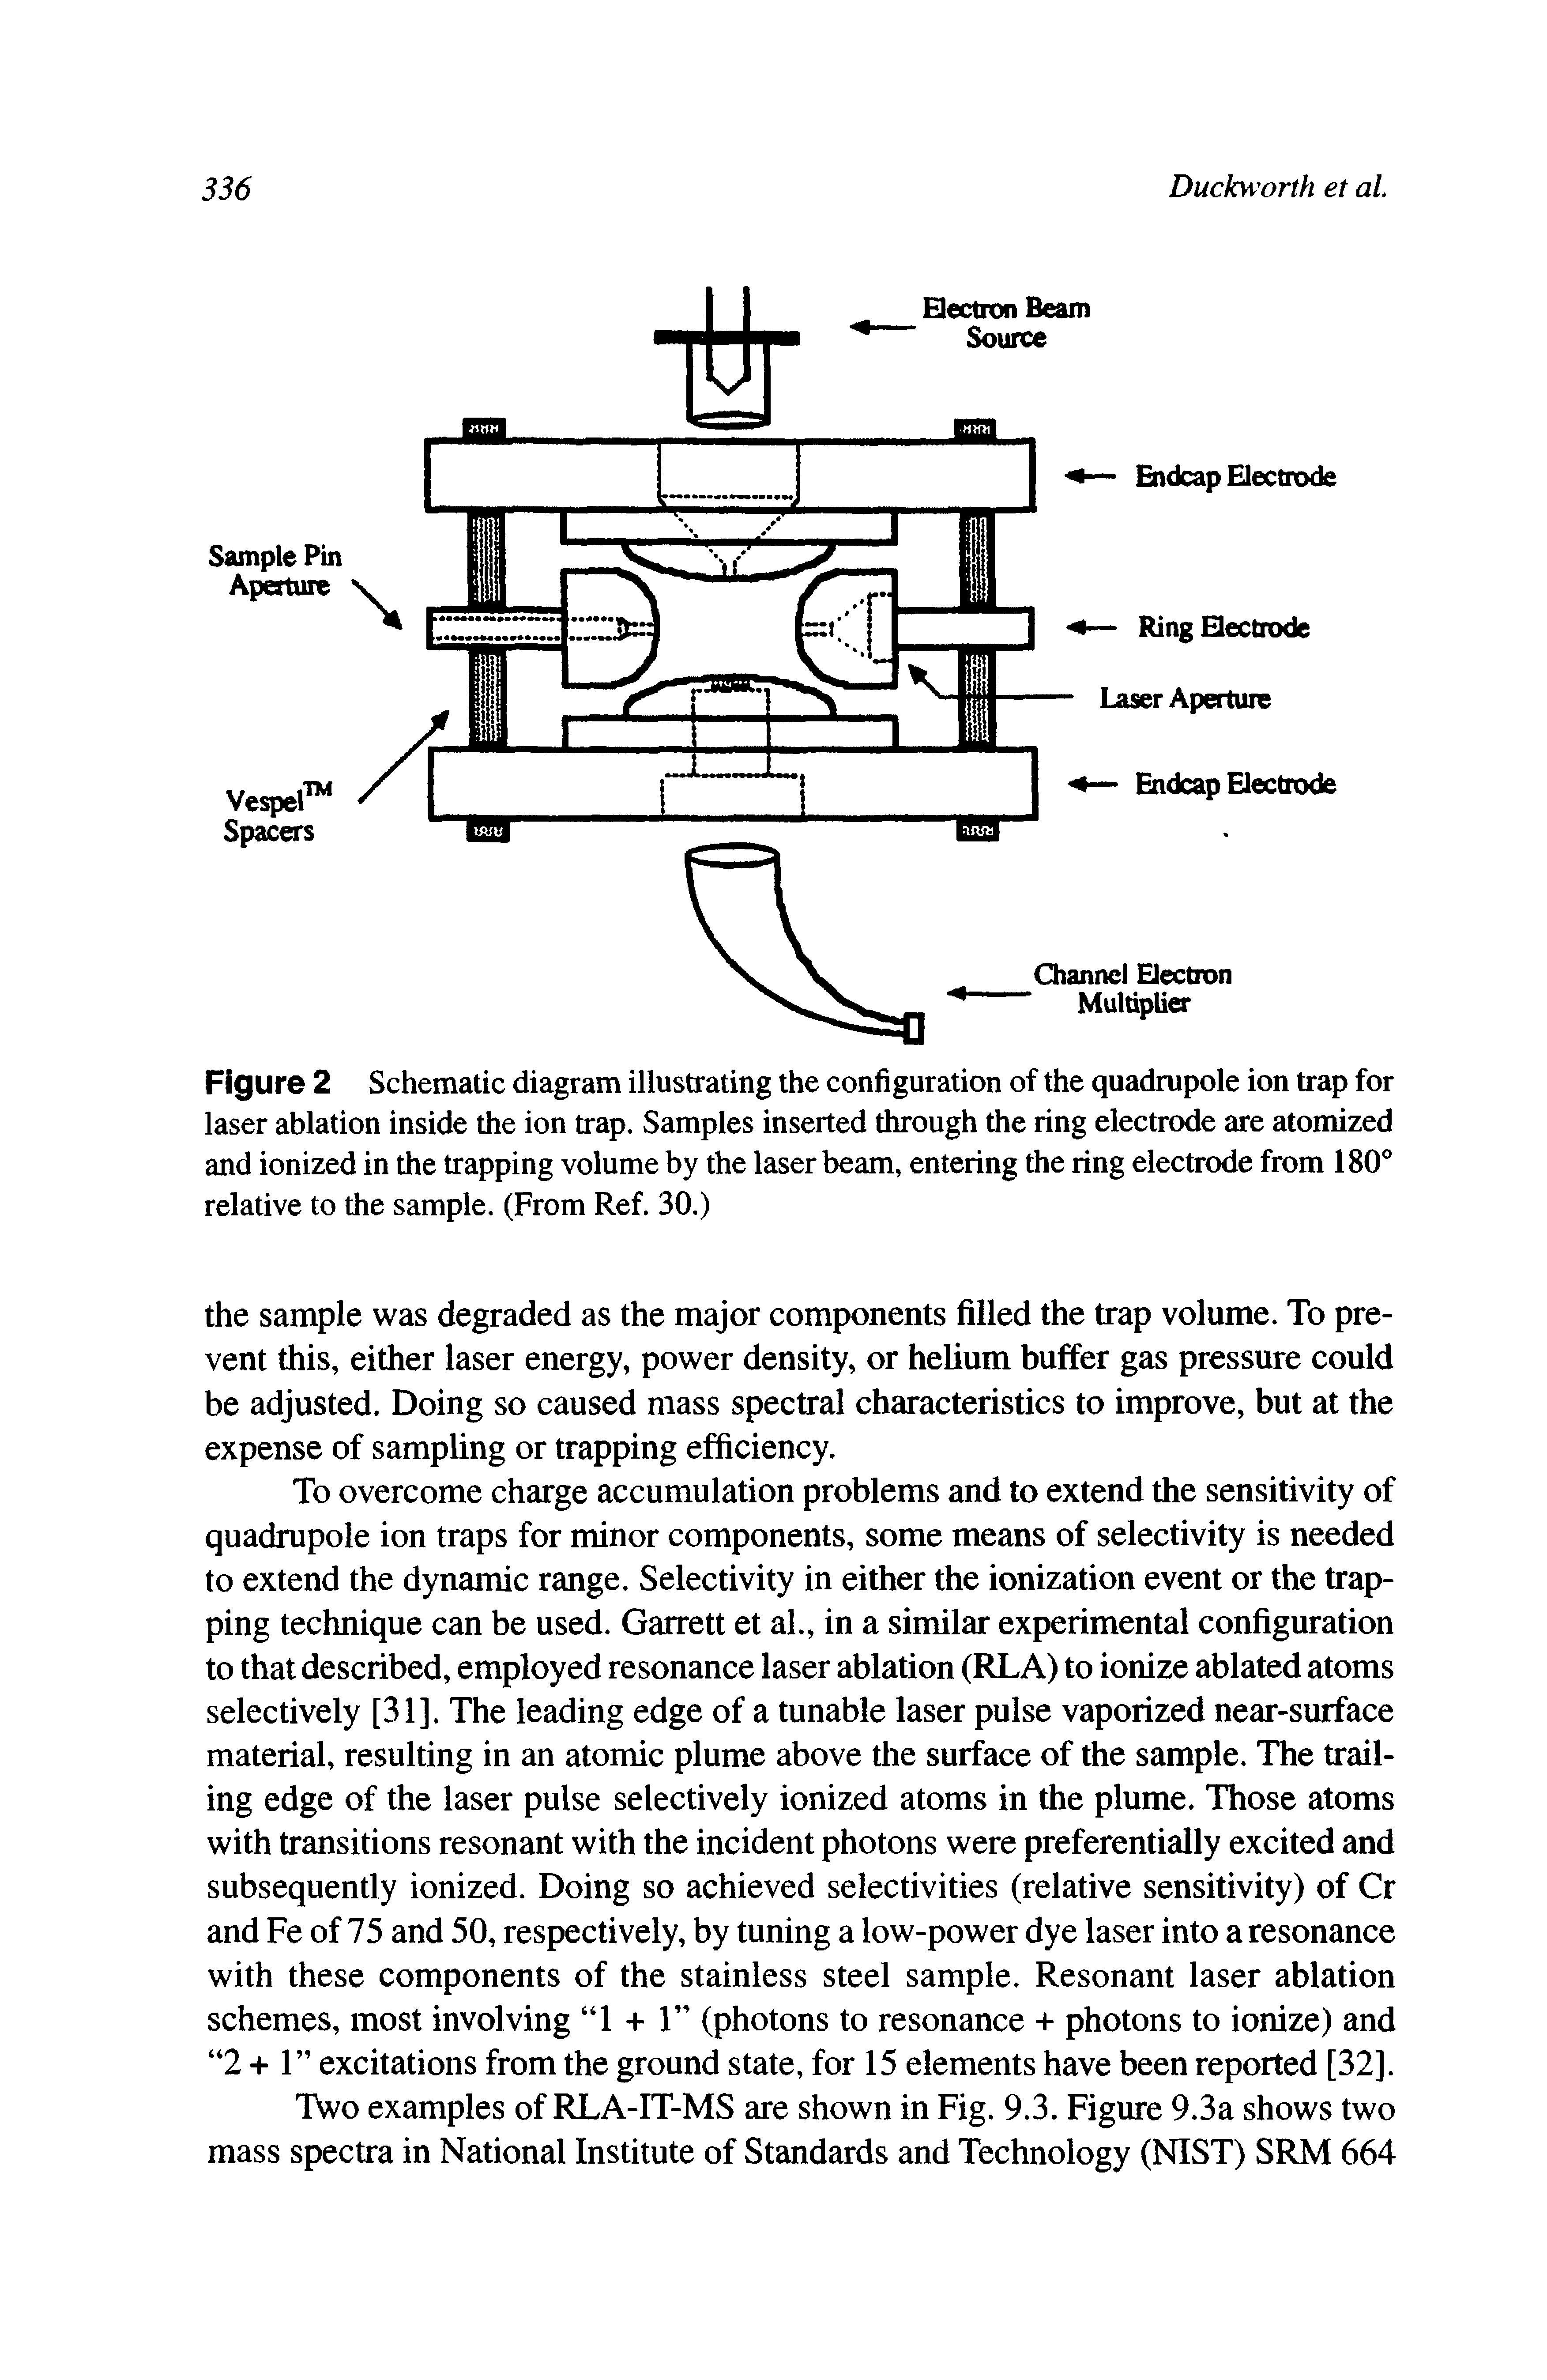 Figure 2 Schematic diagram illustrating the configuration of the quadrupole ion trap for laser ablation inside the ion trap. Samples inserted through the ring electrode are atomized and ionized in the trapping volume by the laser beam, entering the ring electrode from 180° relative to the sample. (From Ref. 30.)...